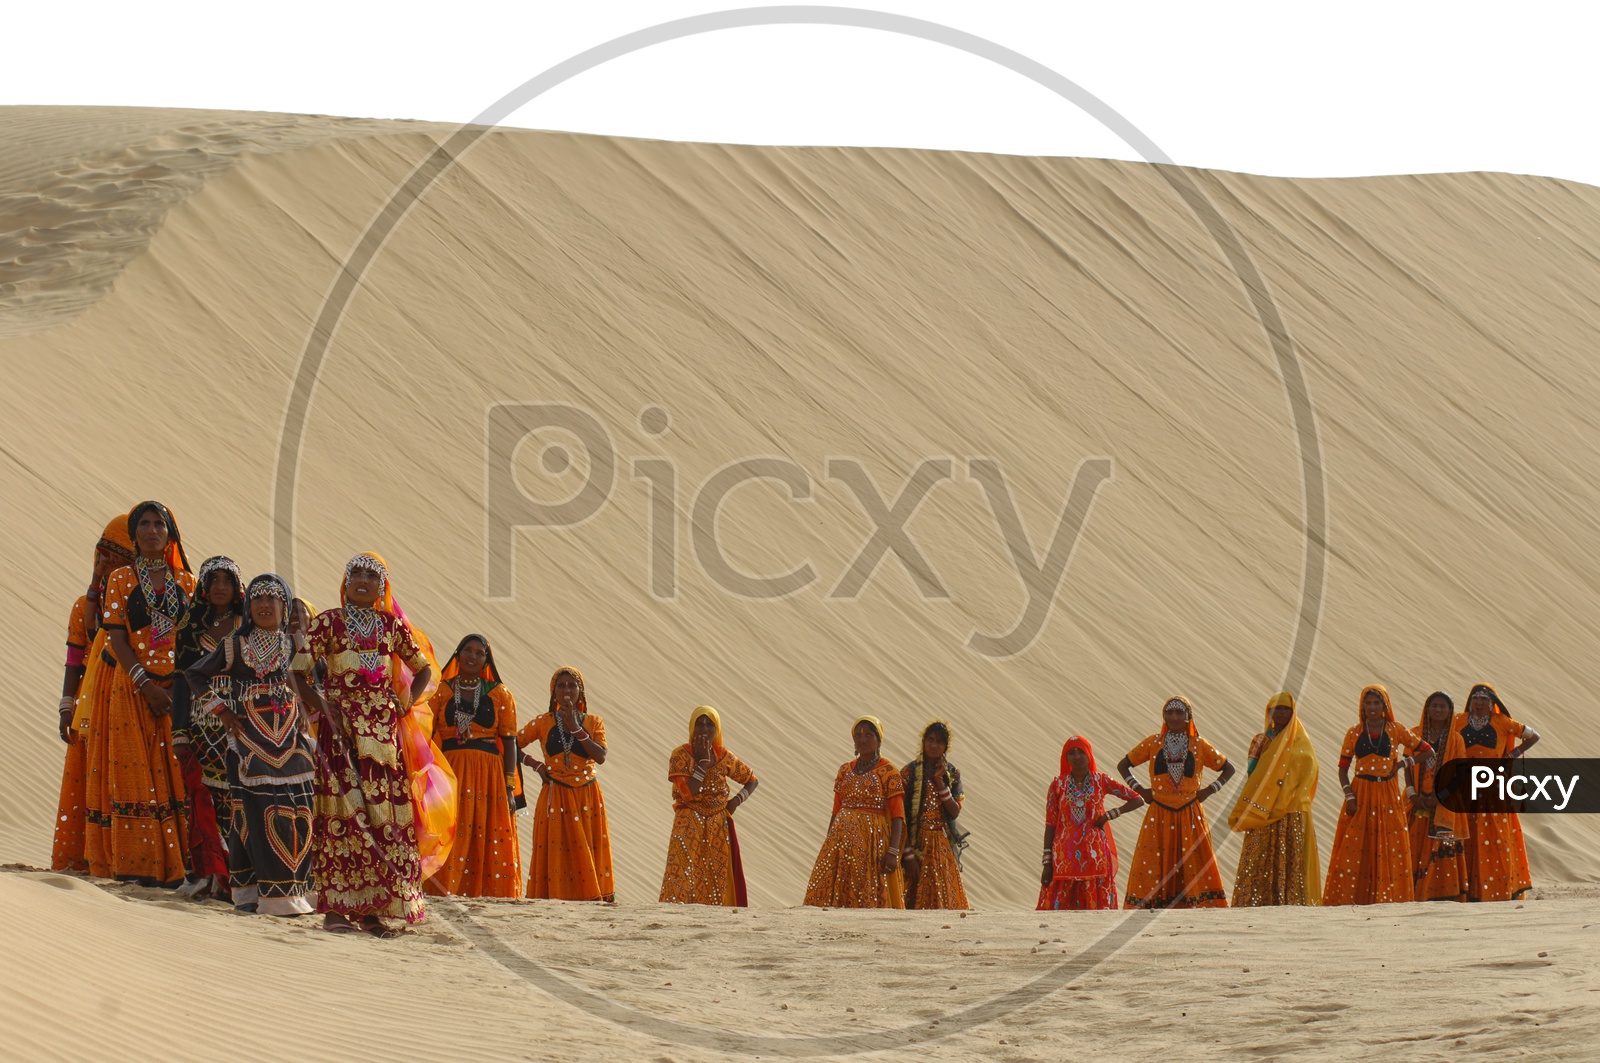 Indian Female with Pot in desert Rajasthan